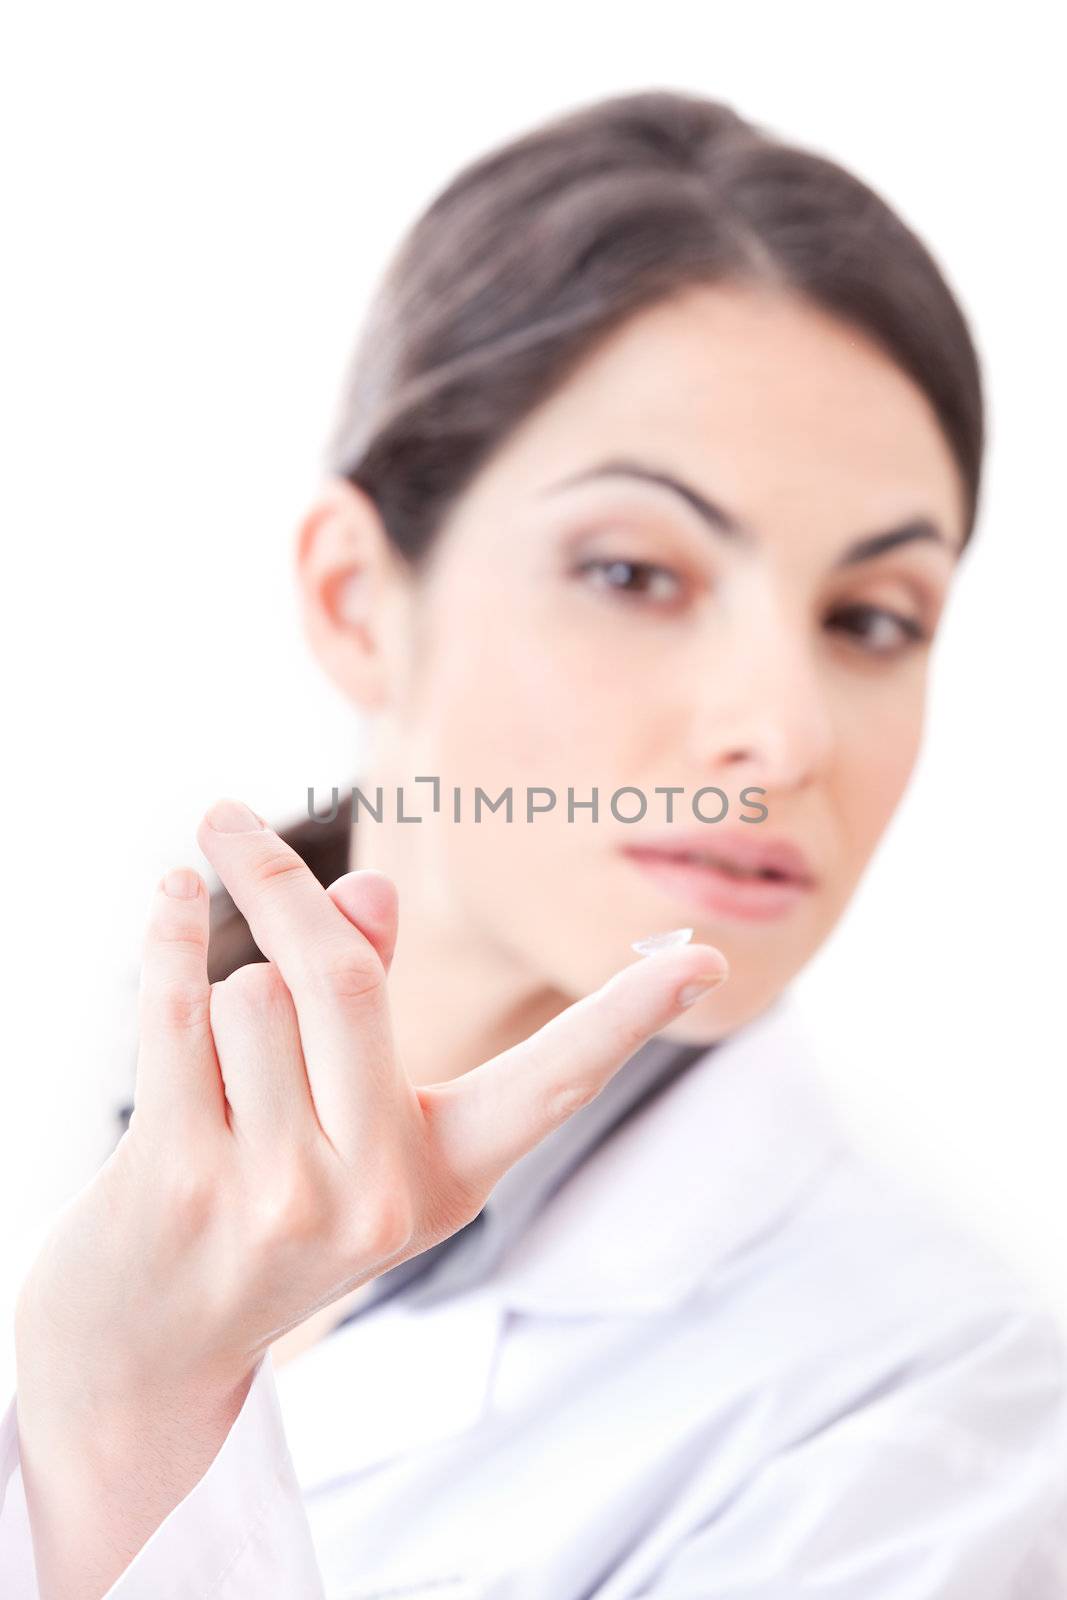 Optometrist Holding Contact Lens by leaf